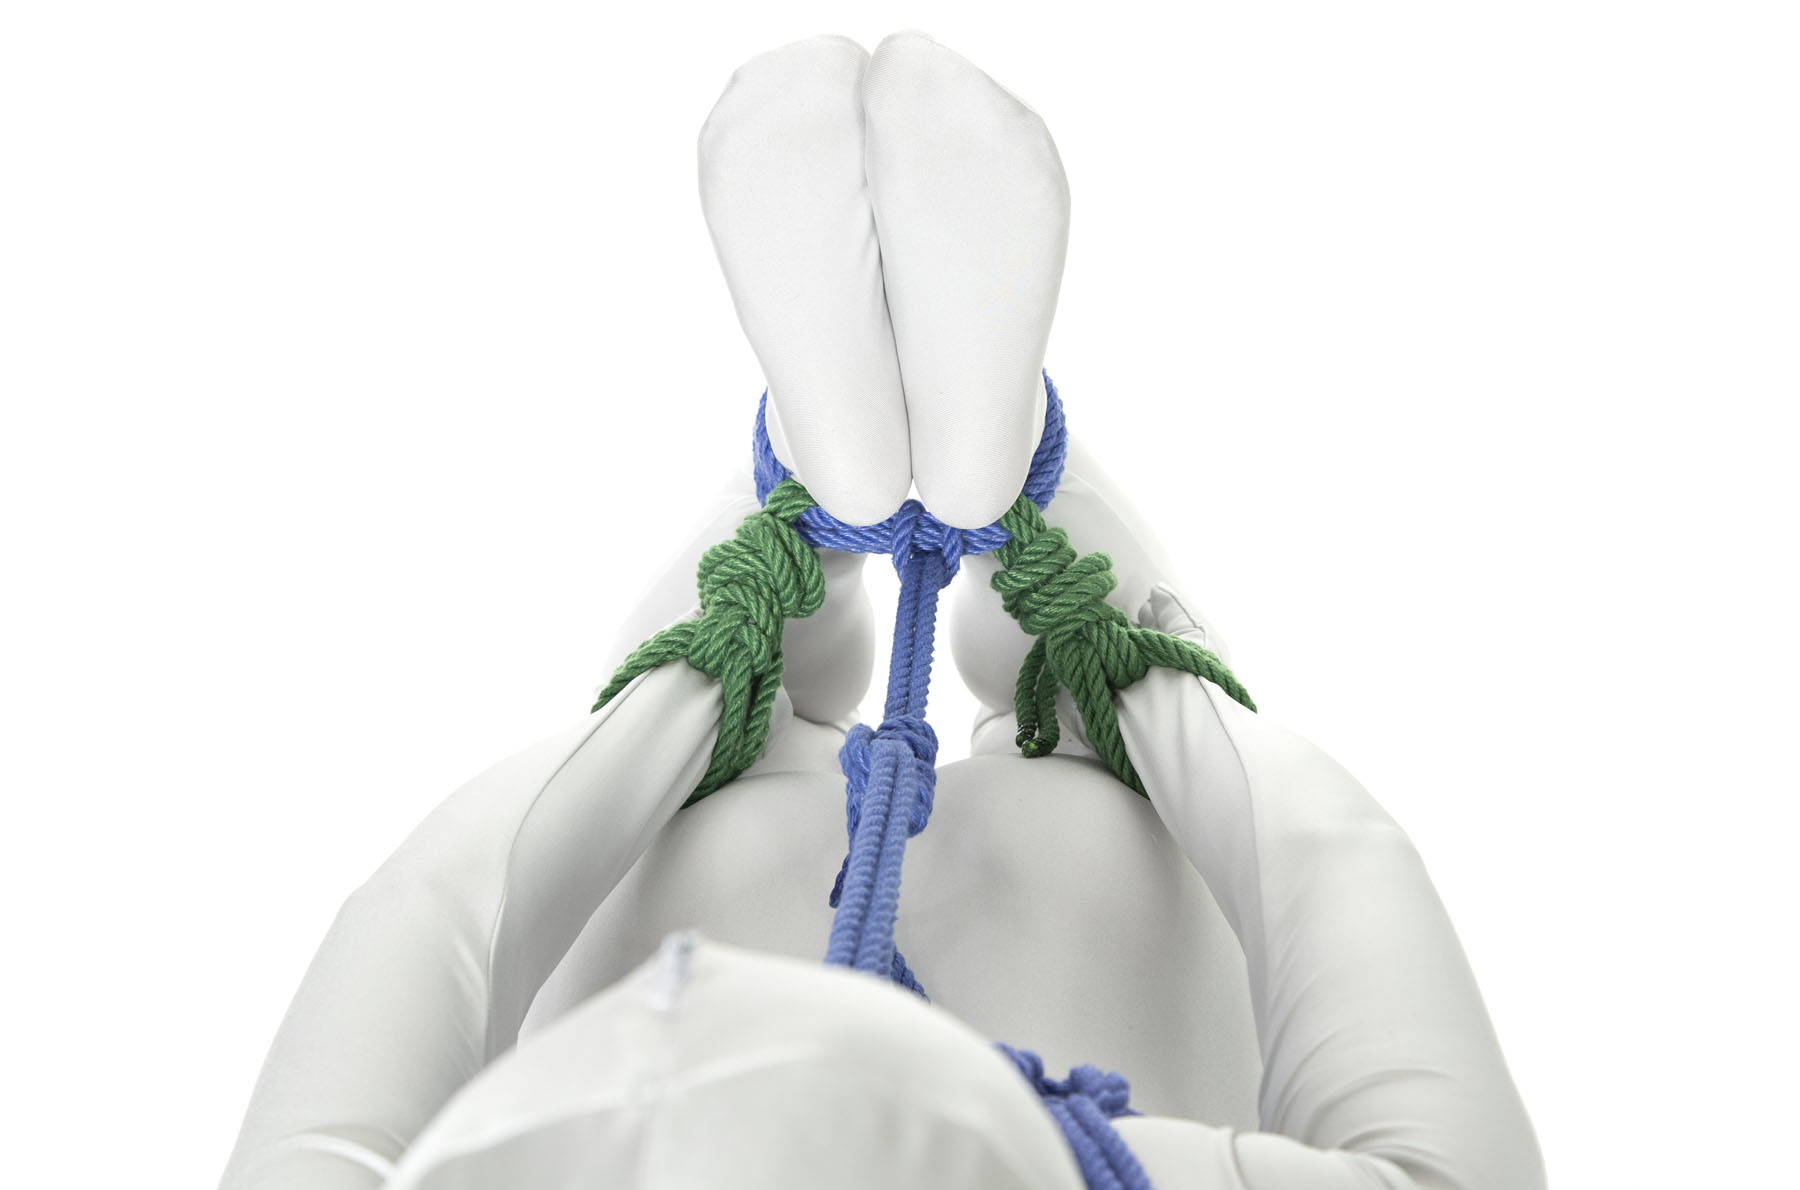 We are looking over the head of a person in a hogtie toward their feet. We can see a little bit of the chest harness and have a clear view of the line connecting the chest harness to the ankles. The wrists are not tied together and are parallel to the body, reaching back toward the ankles. Each wrist has a single column tie in green rope that is attached to the ankle on that side. The separation between the wrist and ankle ties is only a few inches.